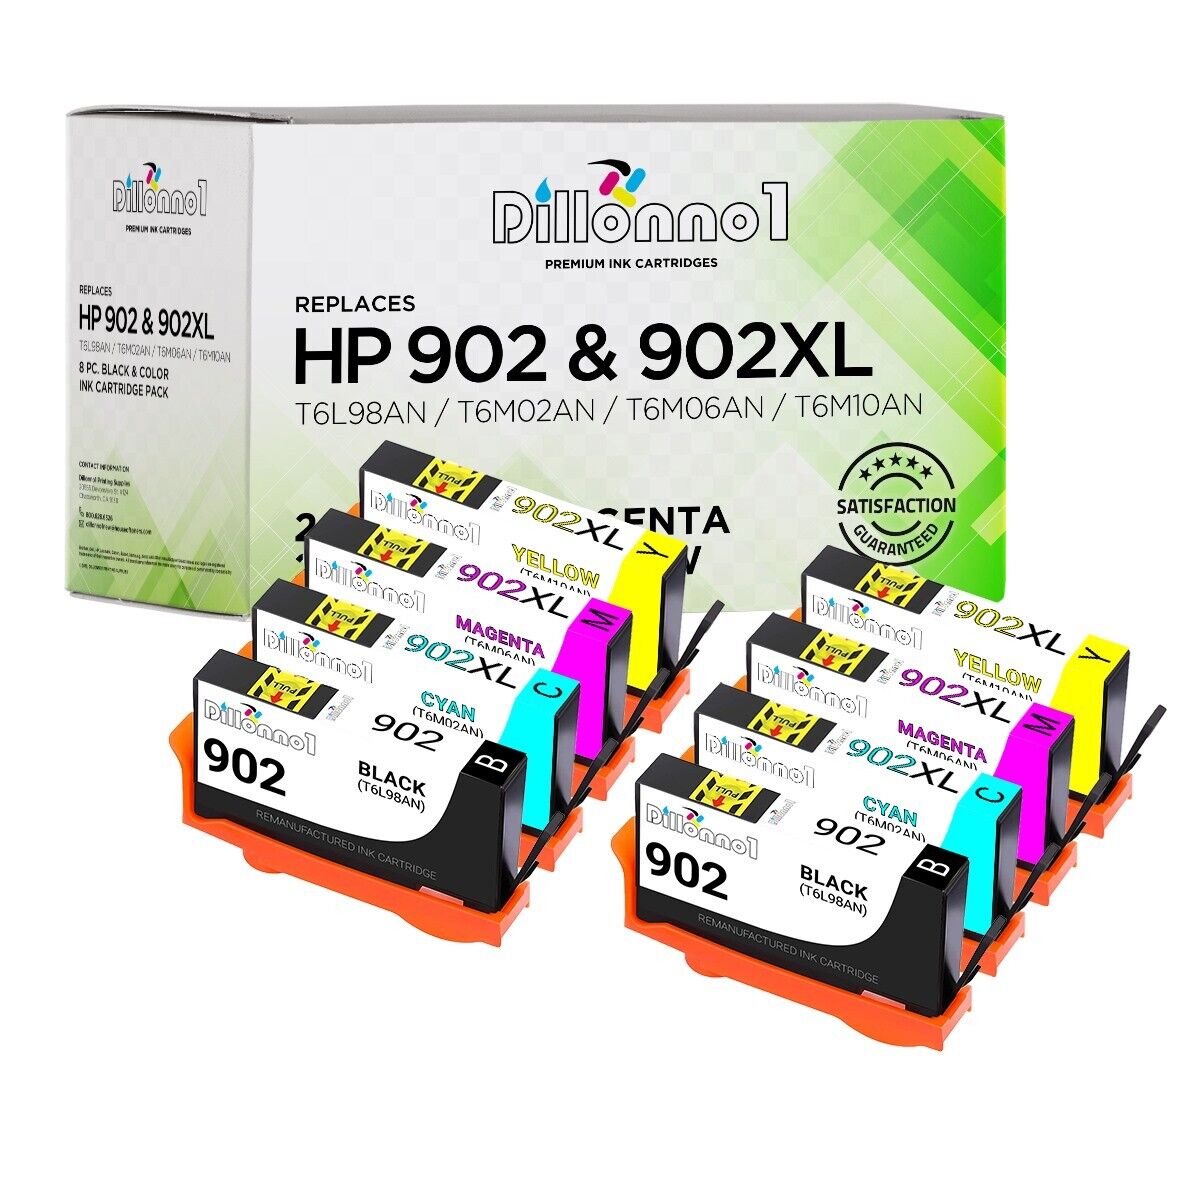 8PK for 902 902 XL Ink Cartridges for HP Officejet Pro 6960 6968 6970 6975 6978